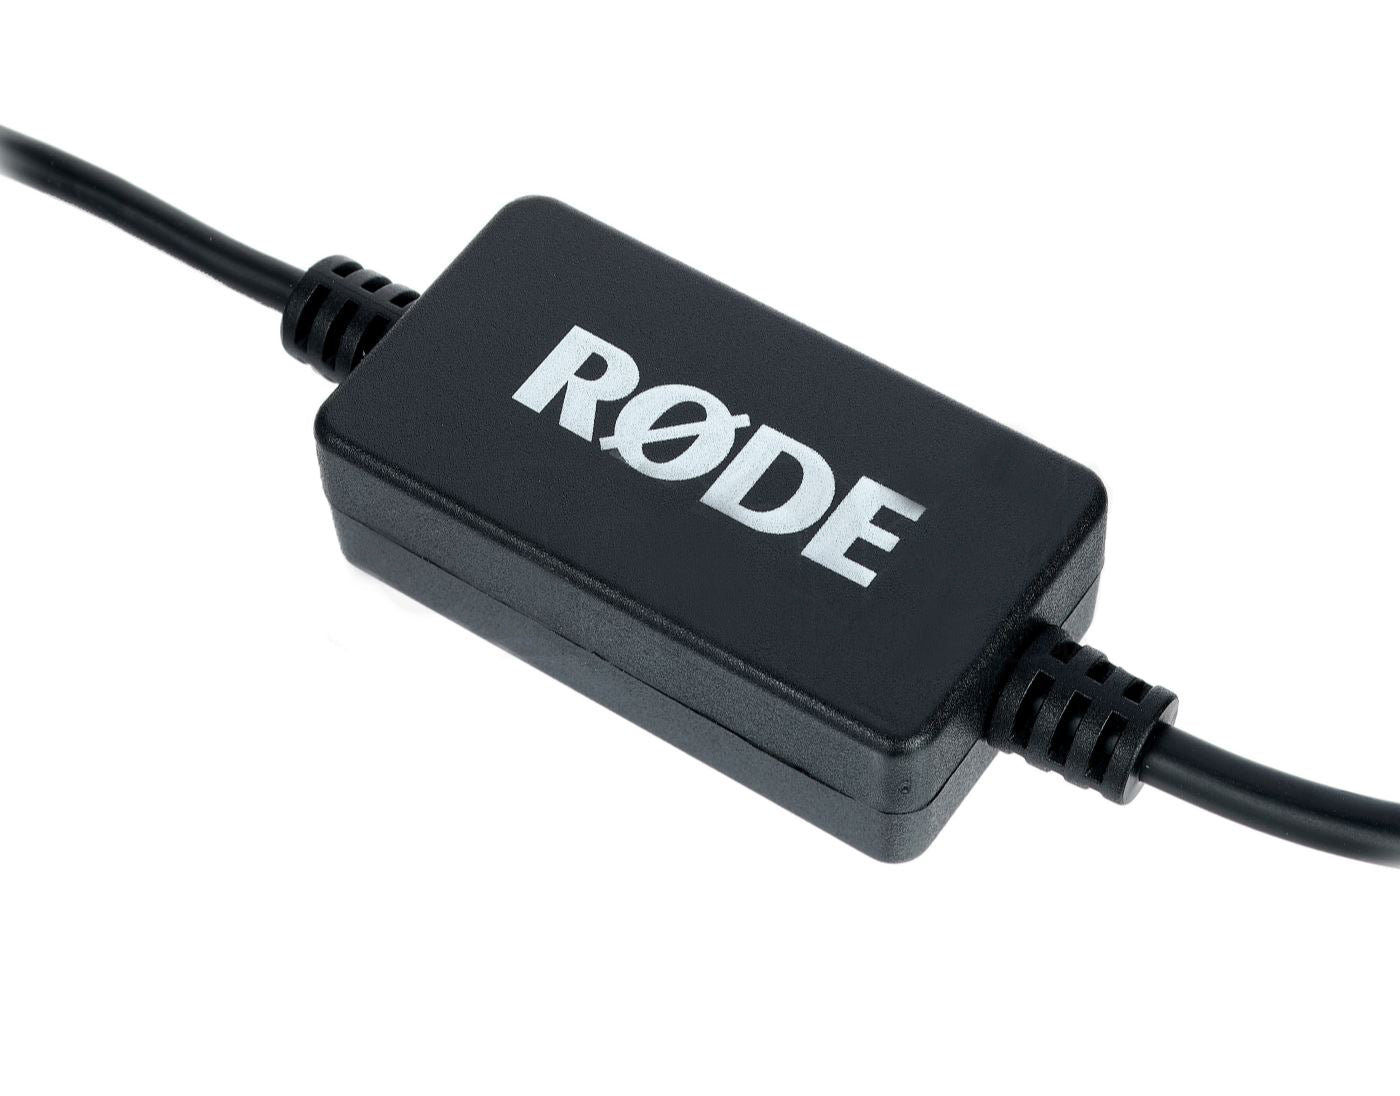 Rode USB Power Cable Adapter for RODECaster Pro with Locking Connector DC-USB1 DCUSB1 DC USB1